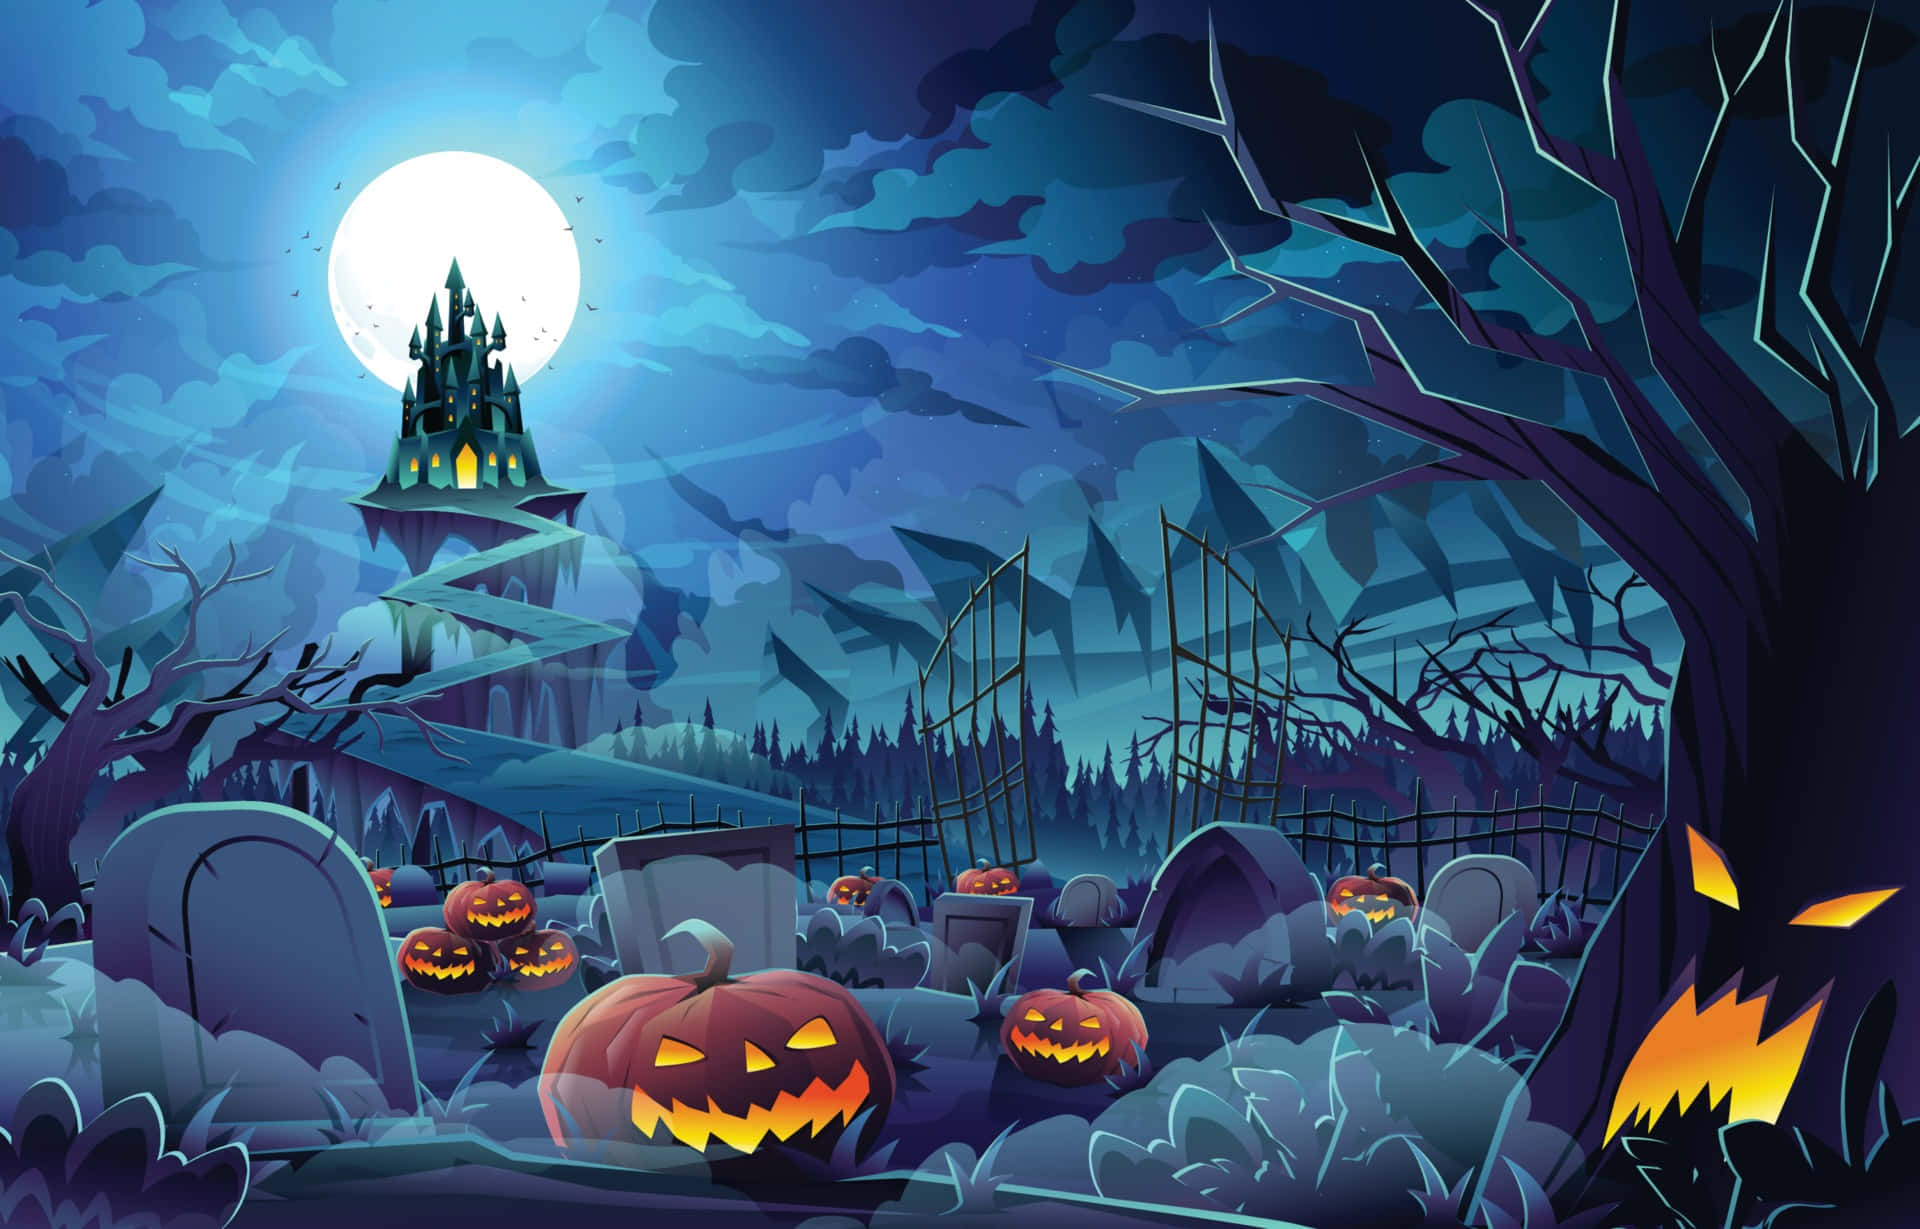 Capture a spooky moment with this Halloween Profile Picture!